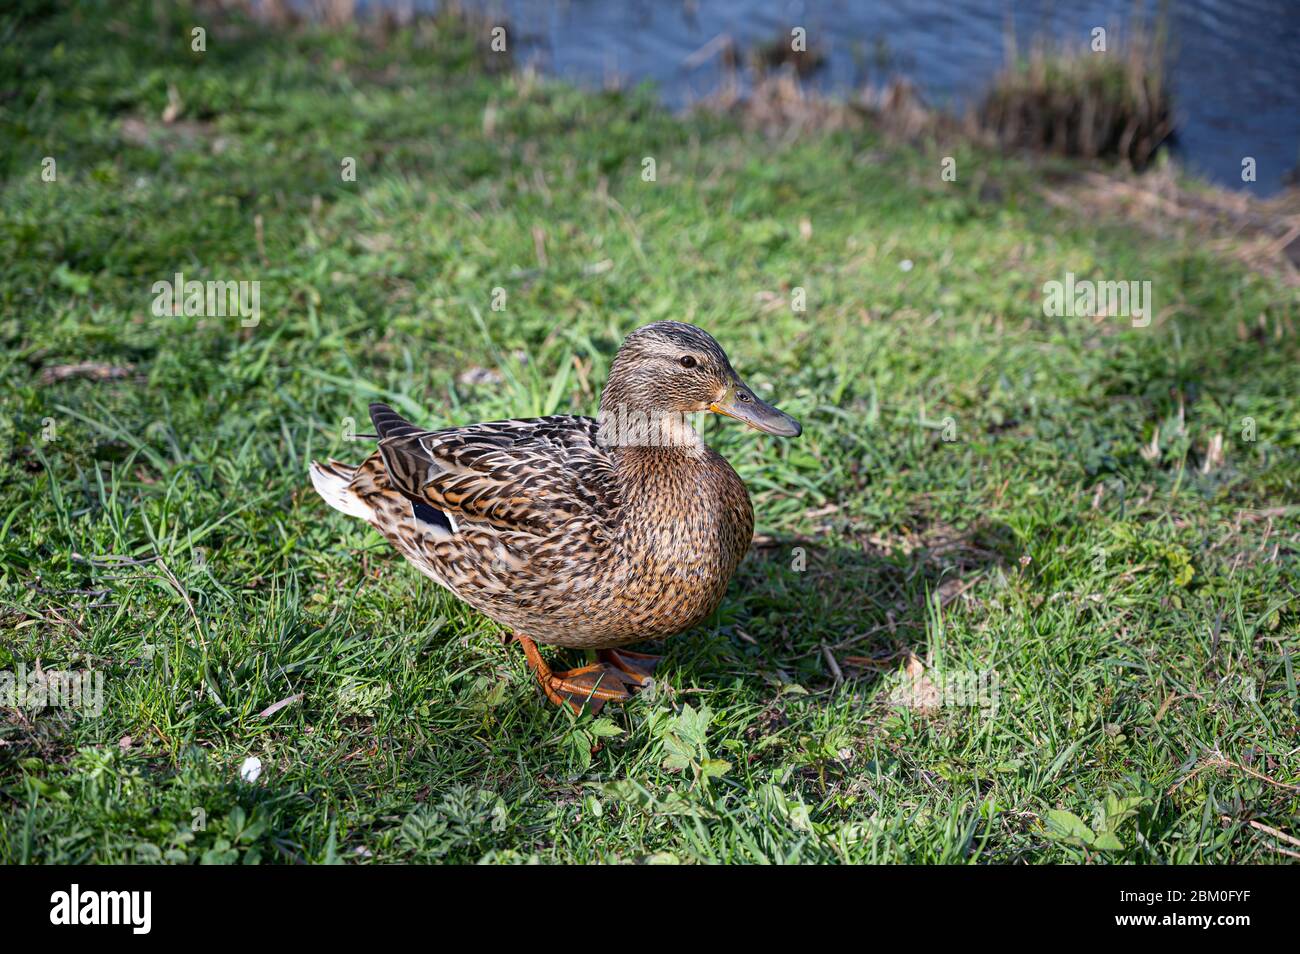 Female duck standing on the grass in park. Stock Photo